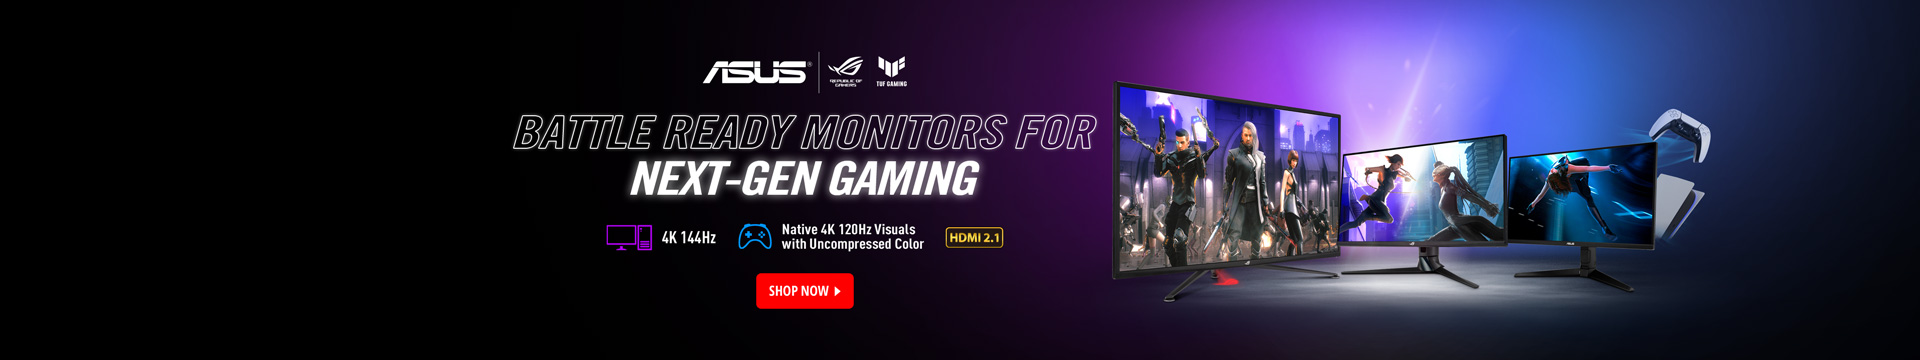 Battle ready monitors for next-gen gaming